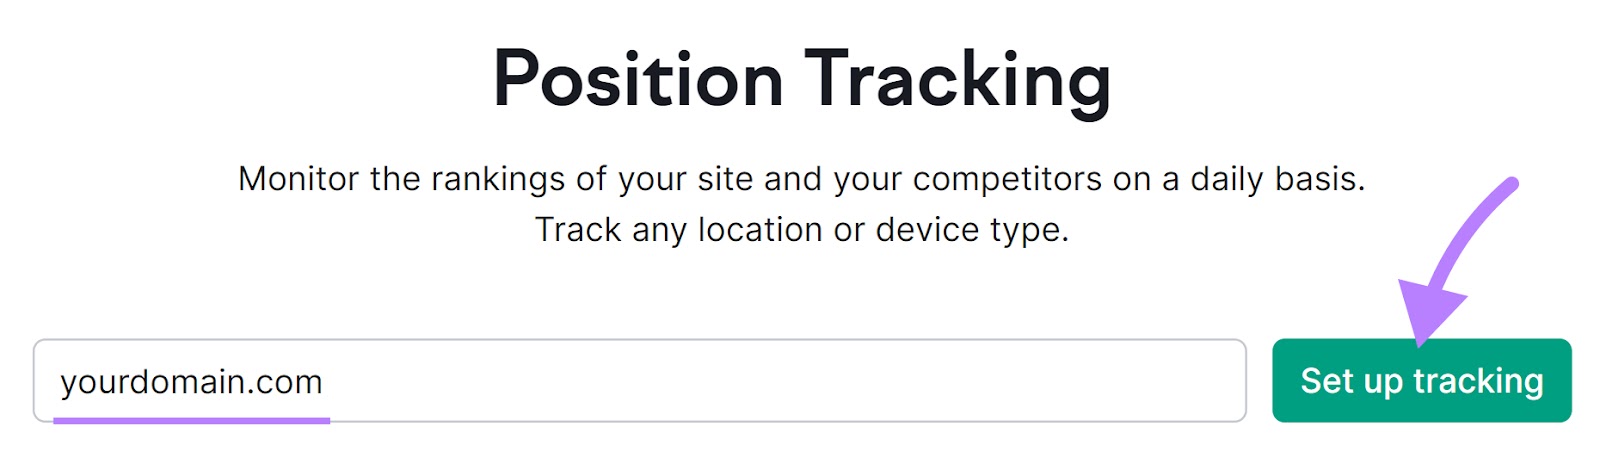 Position Tracking tool